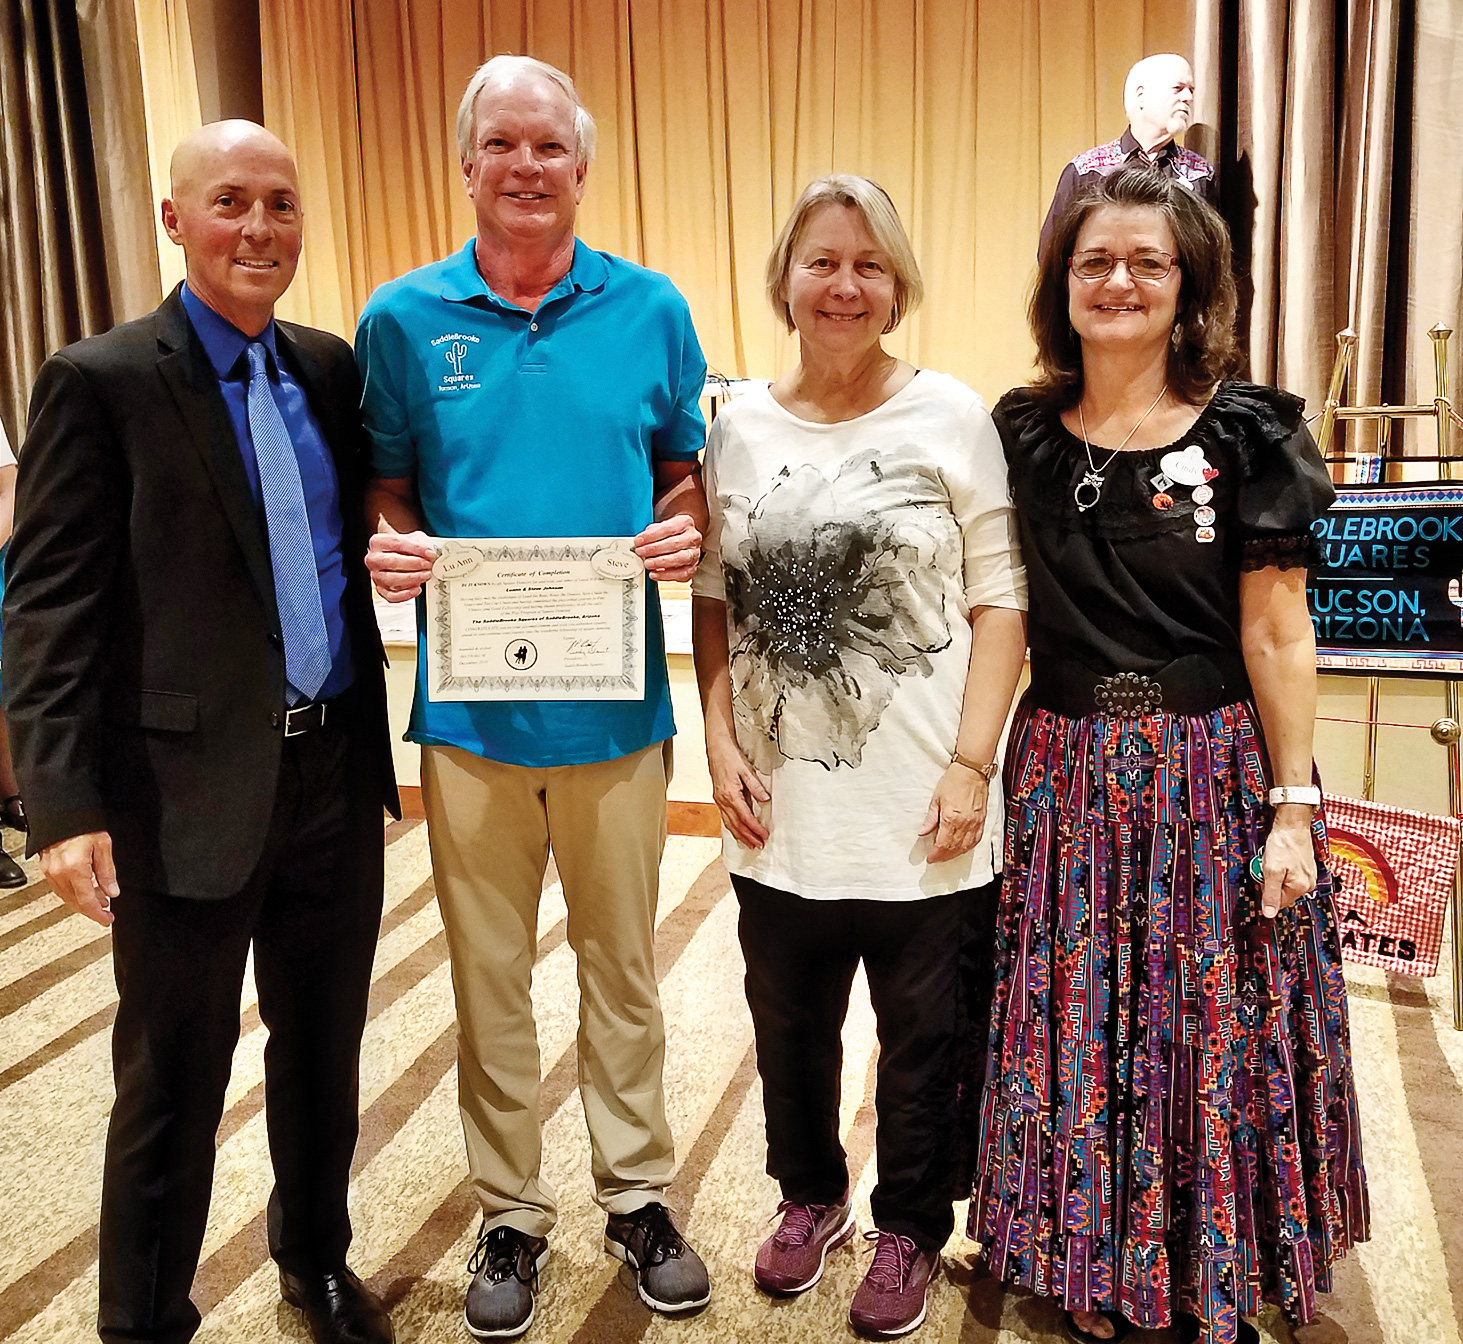 Steve and LuAnn Johnson (center) getting their square dance graduation certificate from J.P. Blount (left) and Cindy Blount (right)